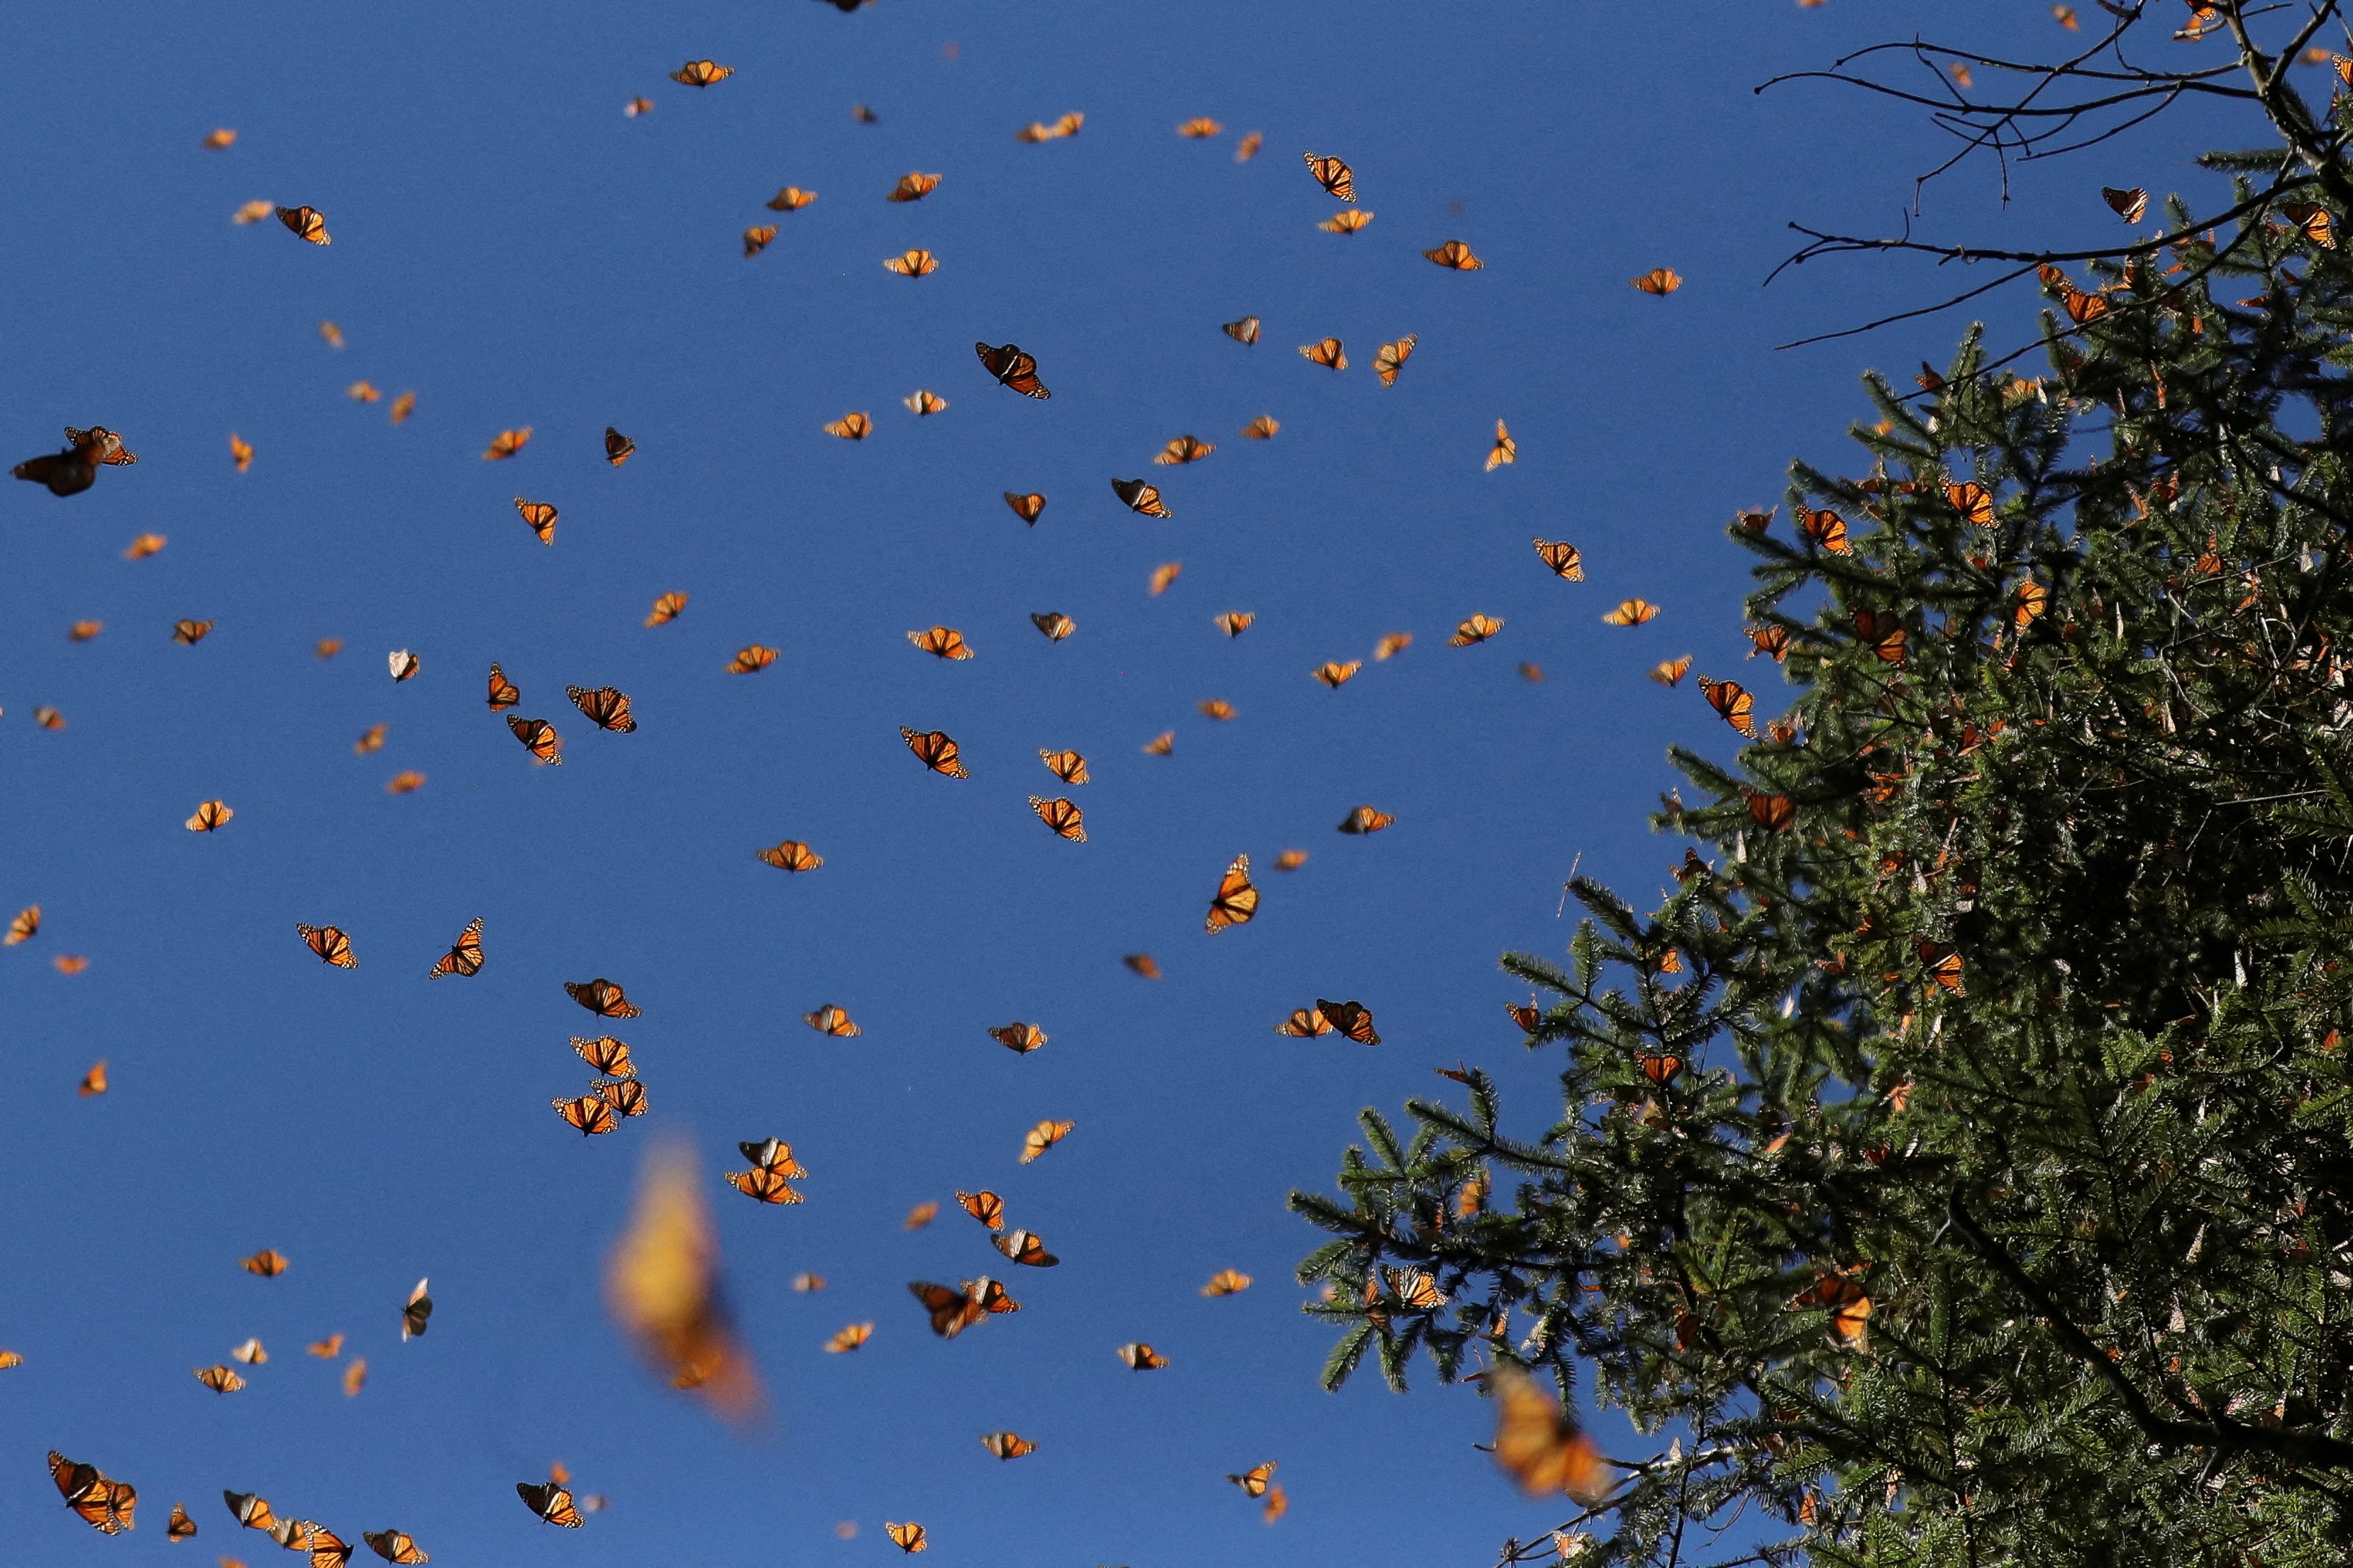 Monarch butterflies at Mexico's Sierra Chincua butterfly sanctuary